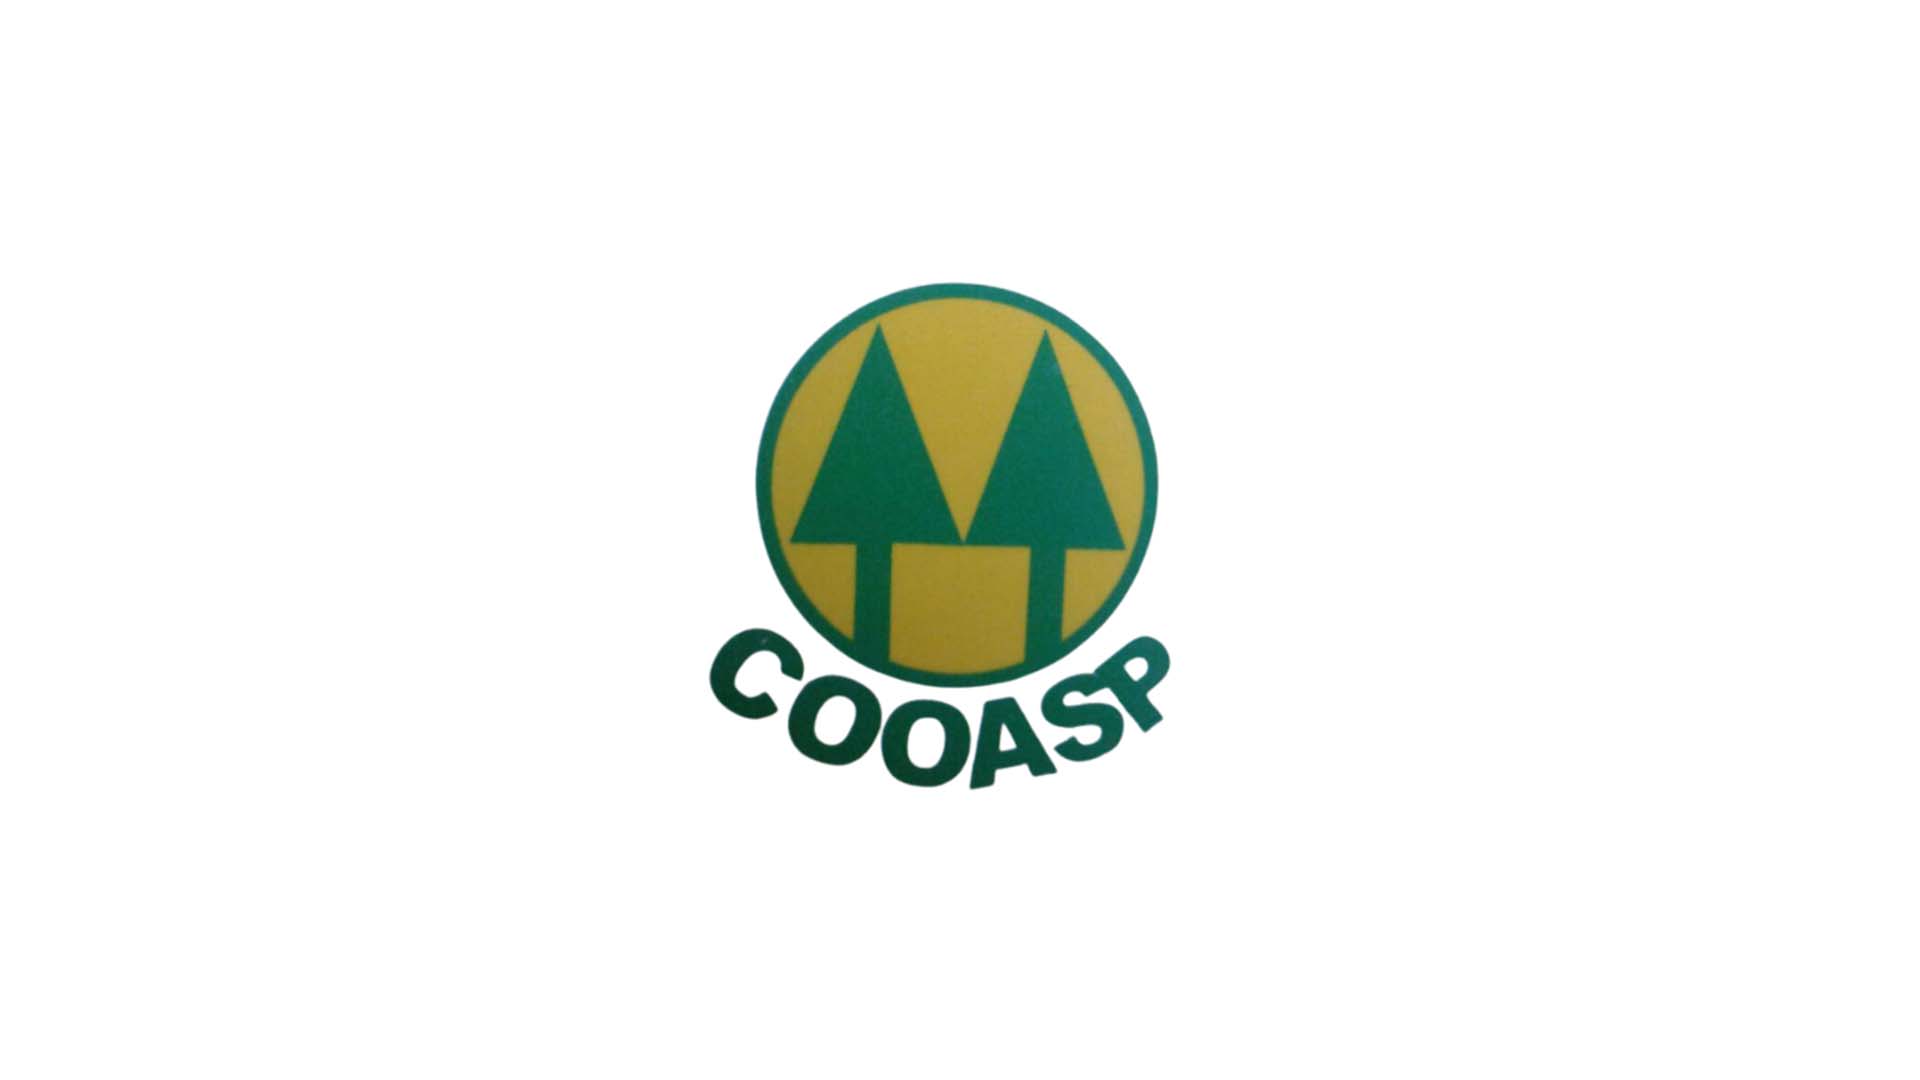 Cooasp